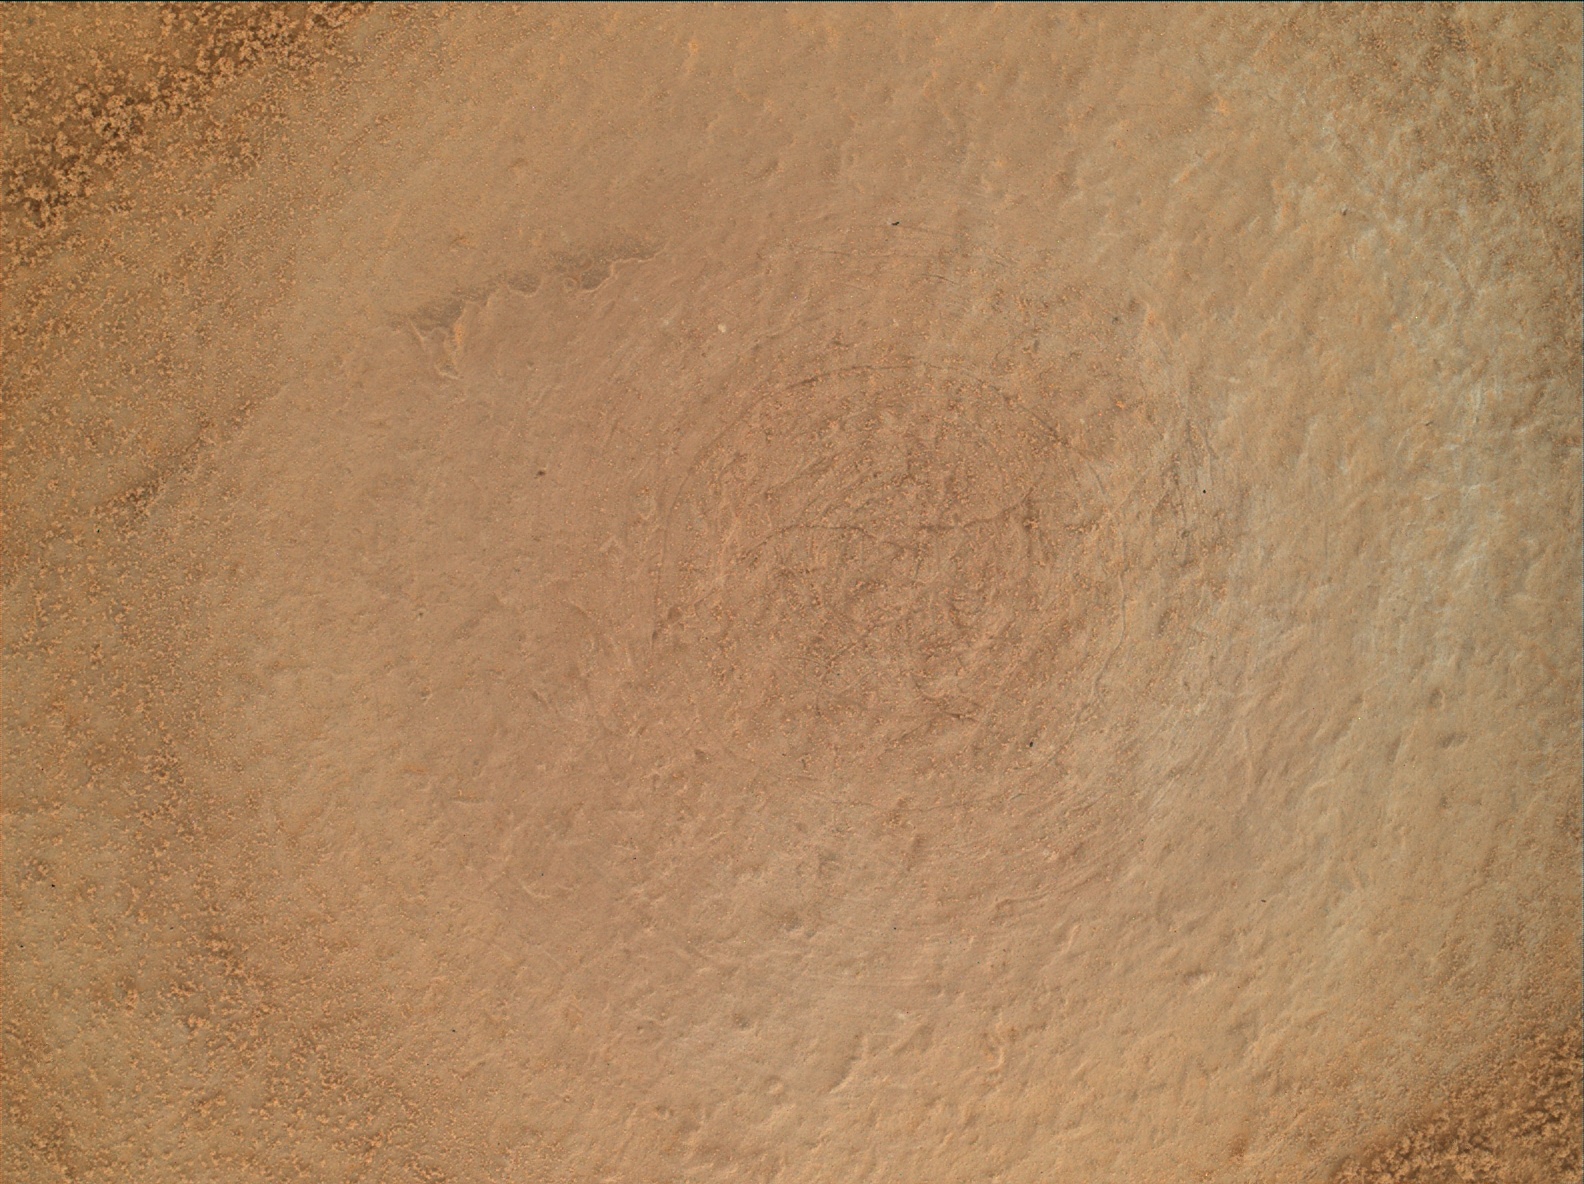 Nasa's Mars rover Curiosity acquired this image using its Mars Hand Lens Imager (MAHLI) on Sol 755